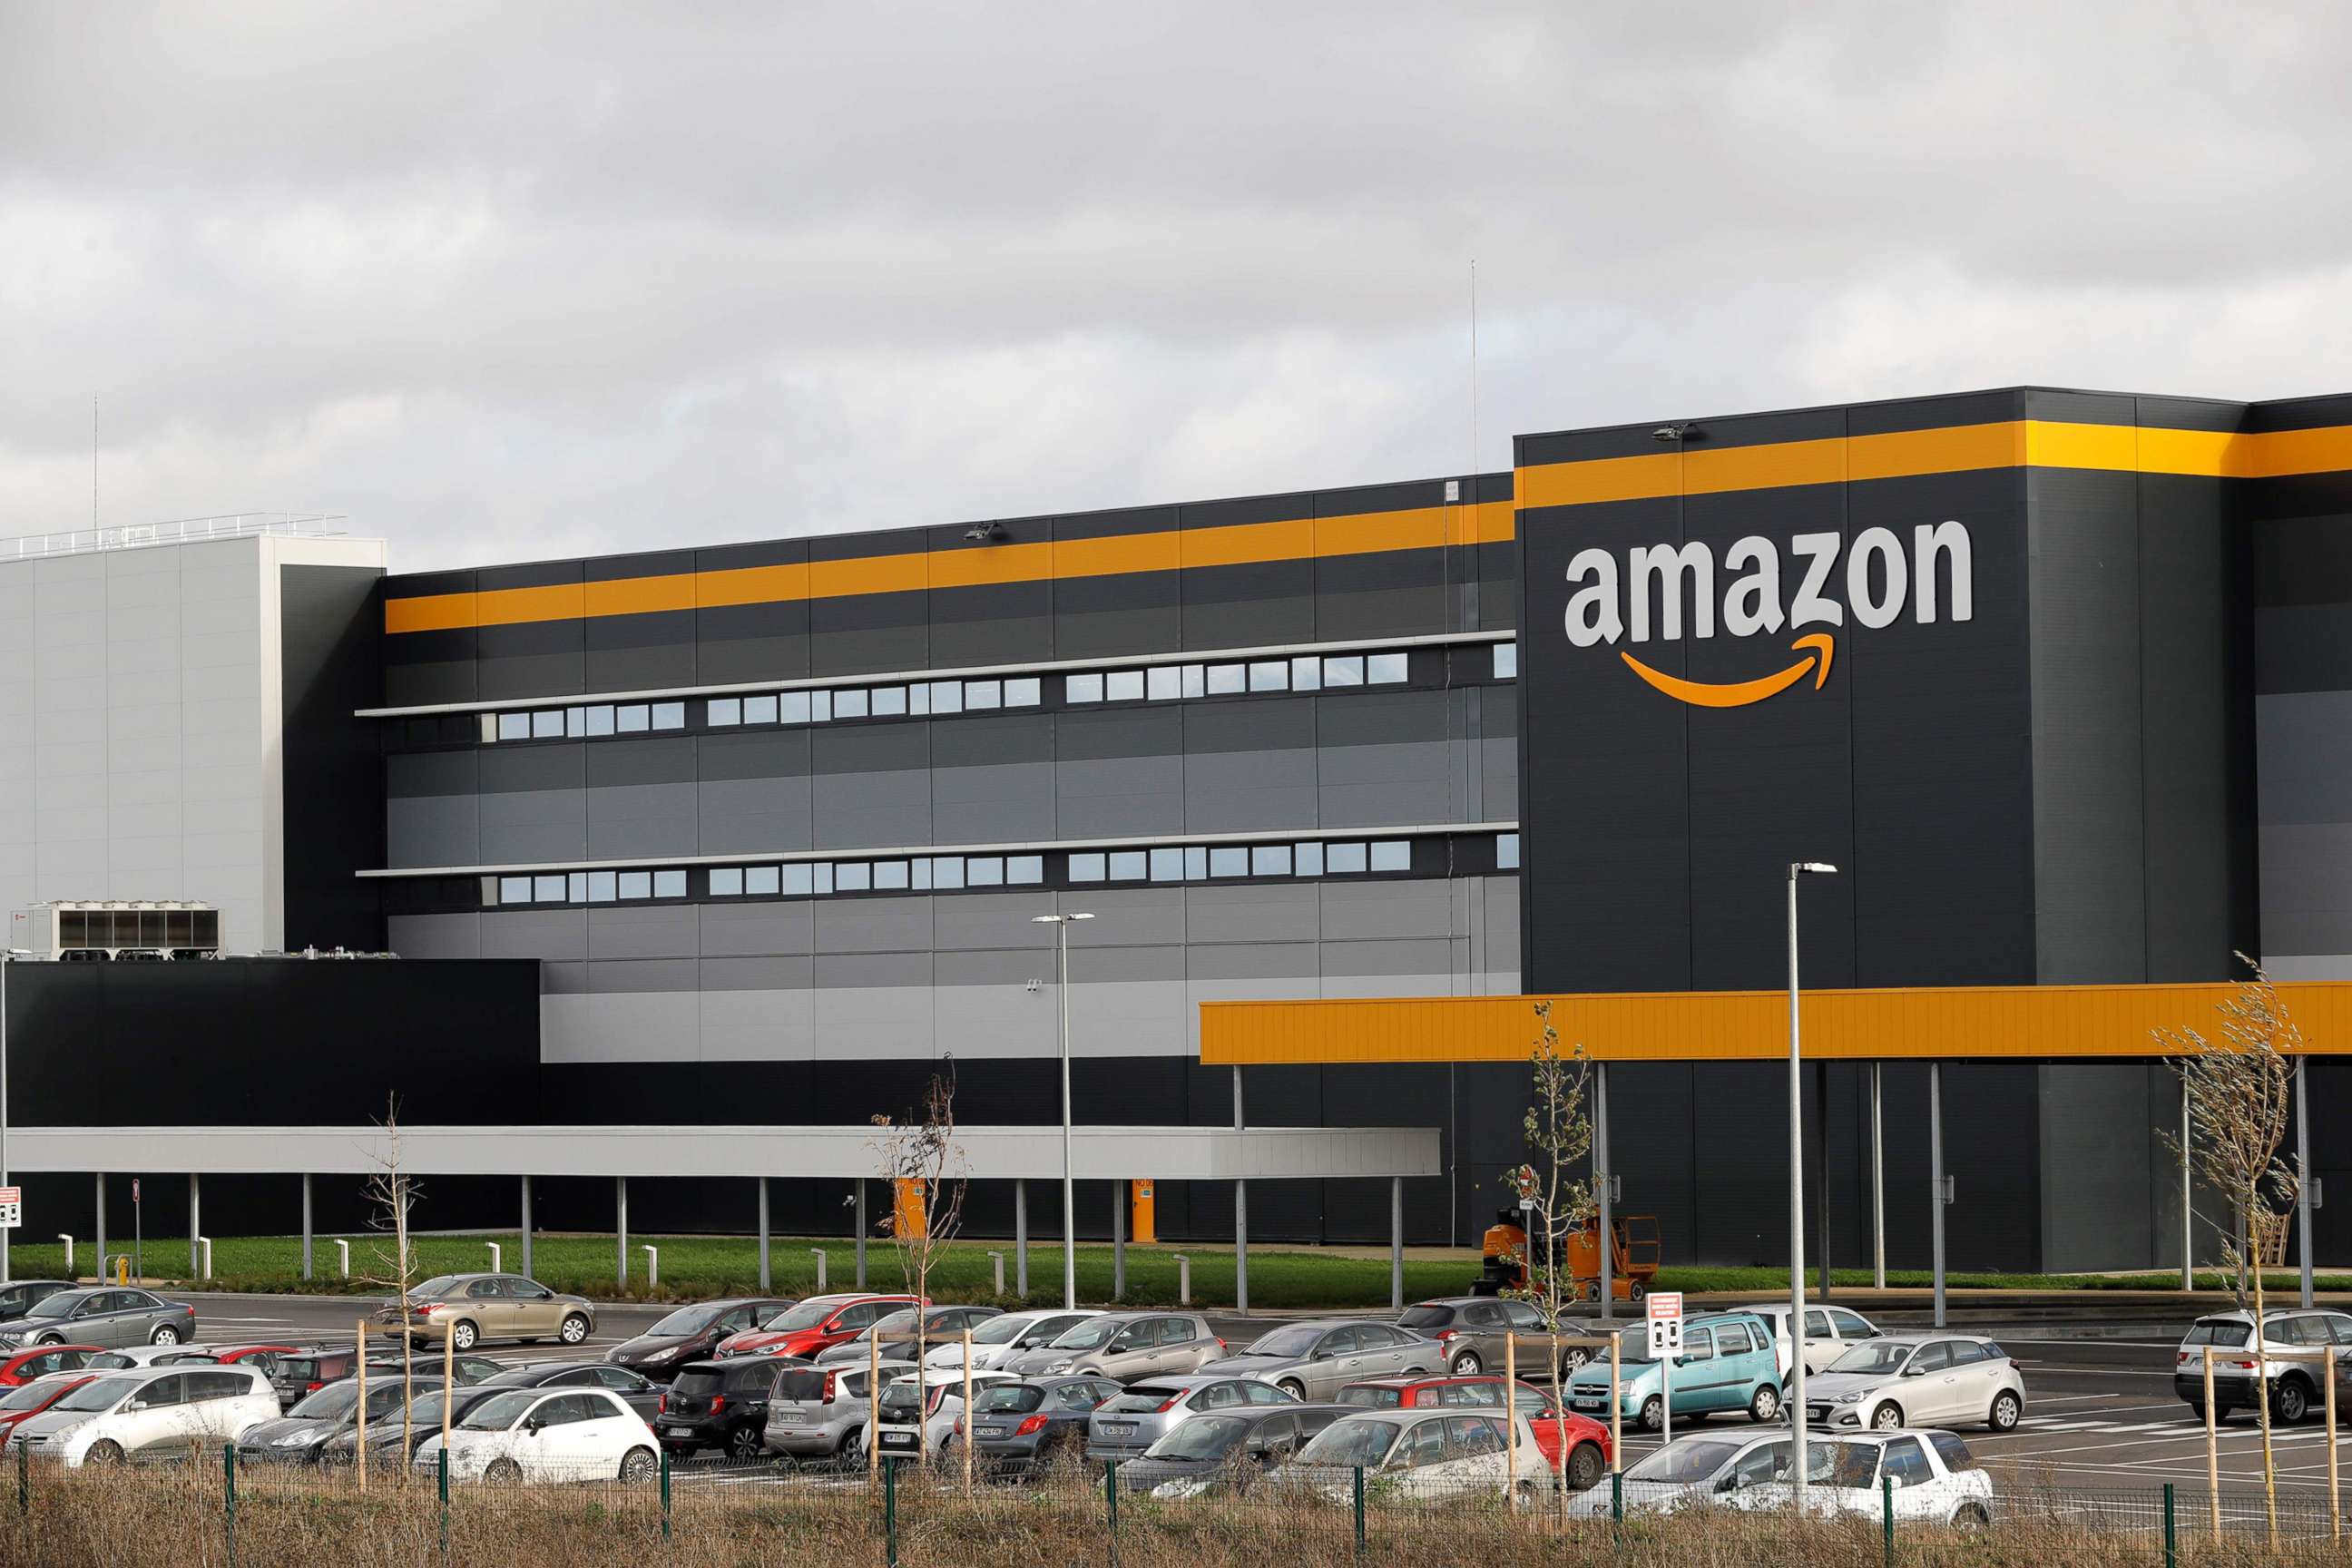 PHOTO: This file photograph taken on Nov. 28, 2019, shows a logo on the side of an Amazon company center in France.